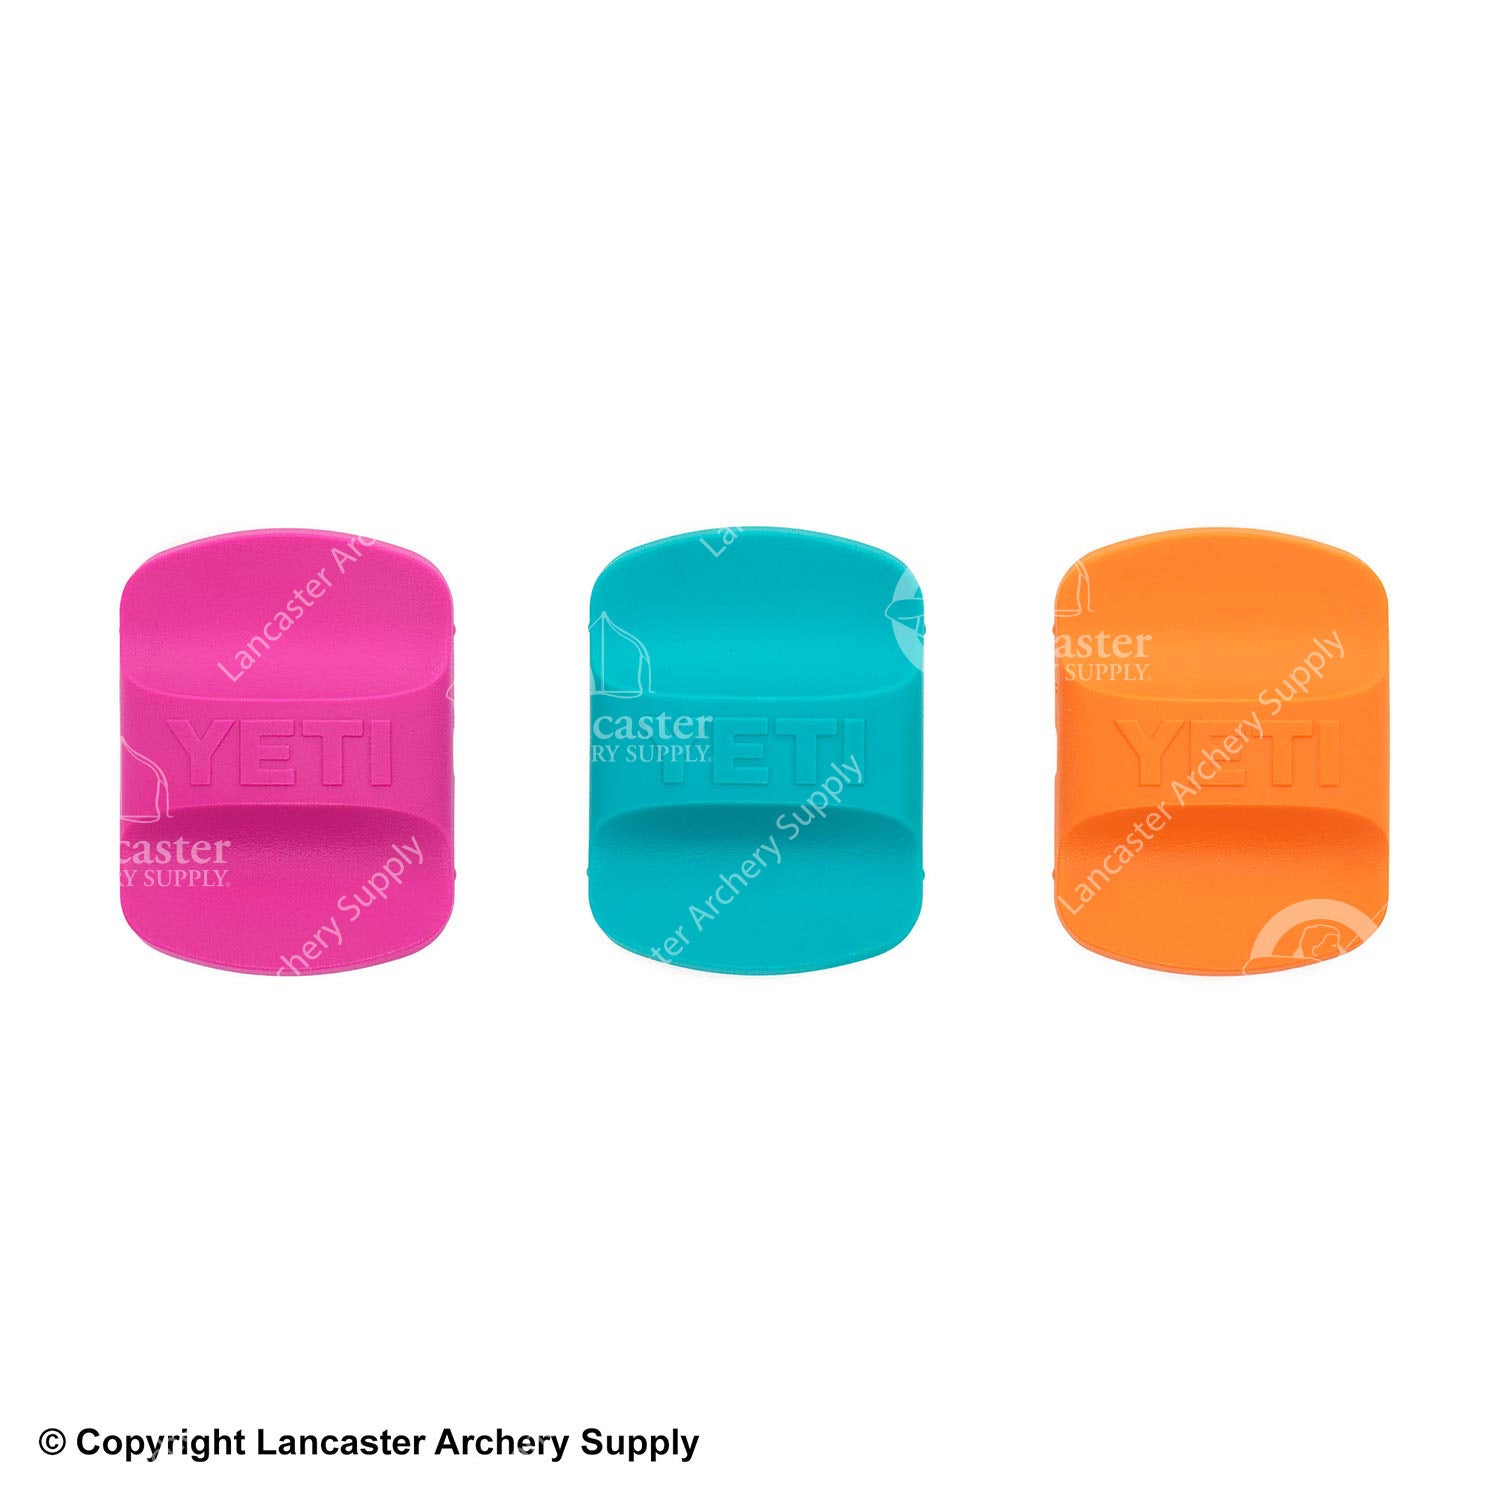 YETI Magslider Seasonal Color Replacement Pack – Lancaster Archery Supply